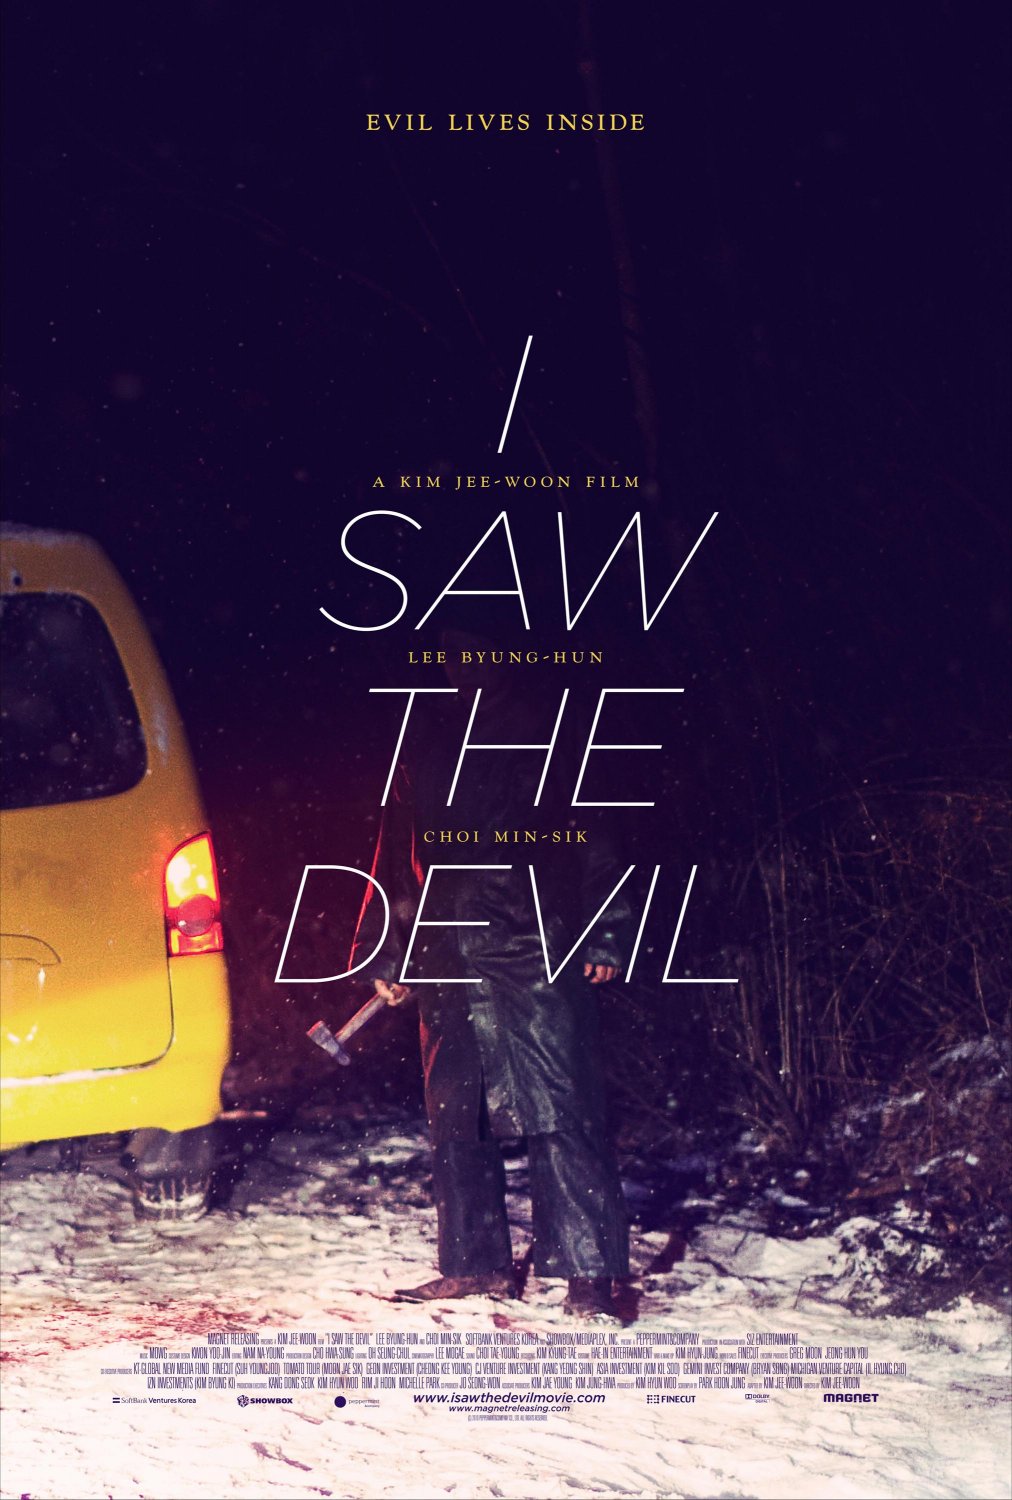 http://www.bloodygoodhorror.com/bgh/files/covers/i-saw-the-devil-movie-poster-01.jpg